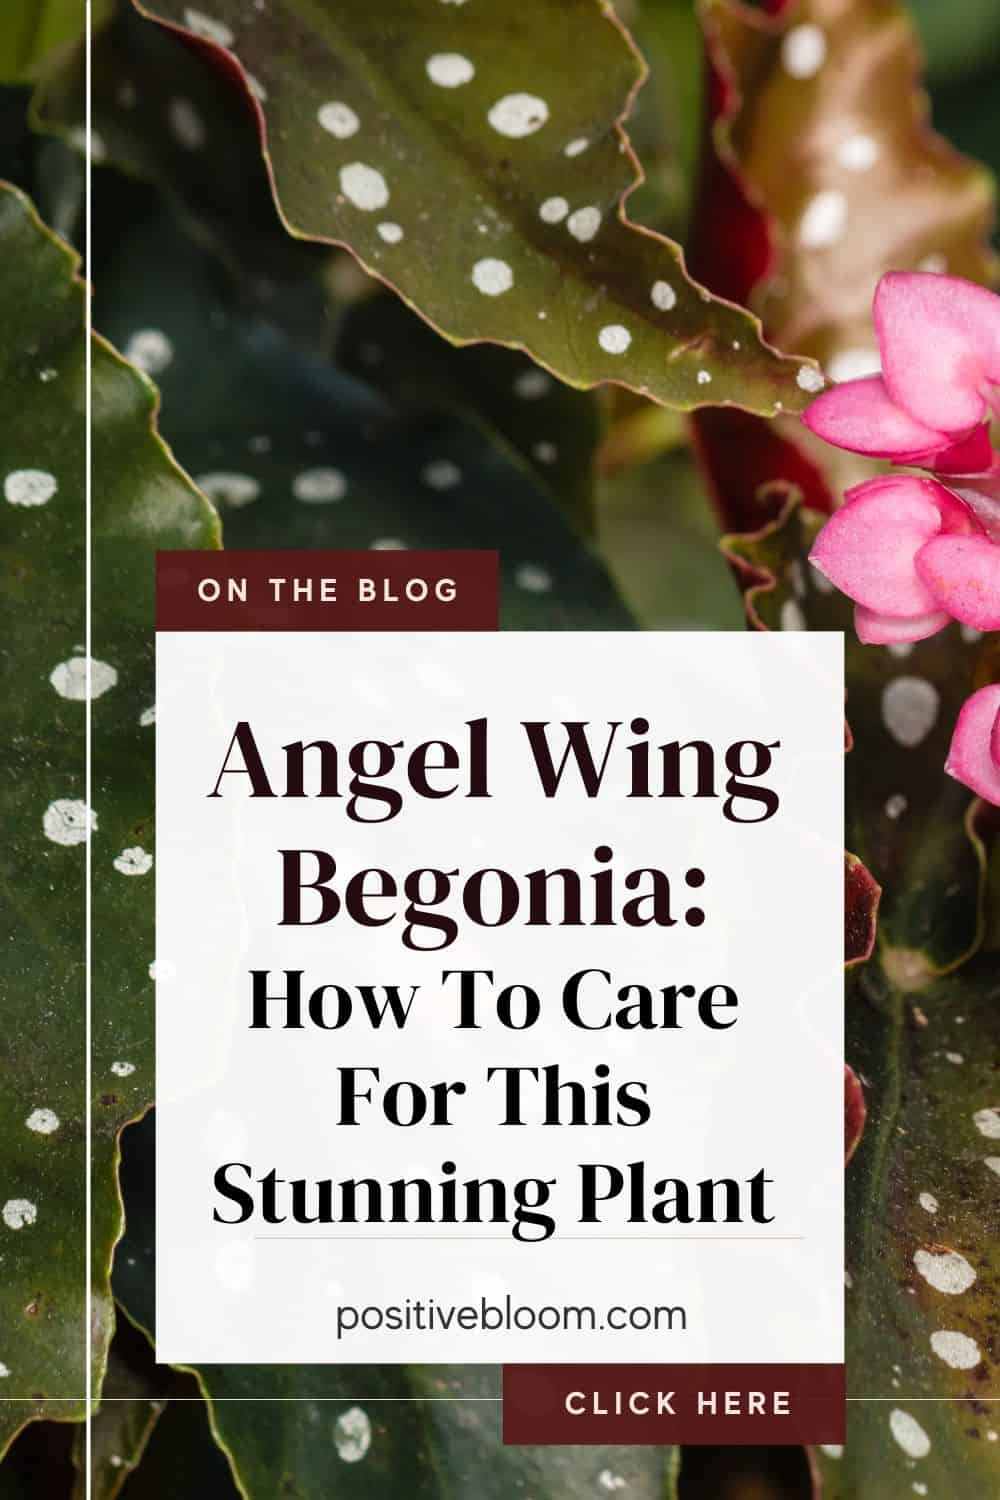 Angel Wing Begonia How To Care For This Stunning Plant Pinterest